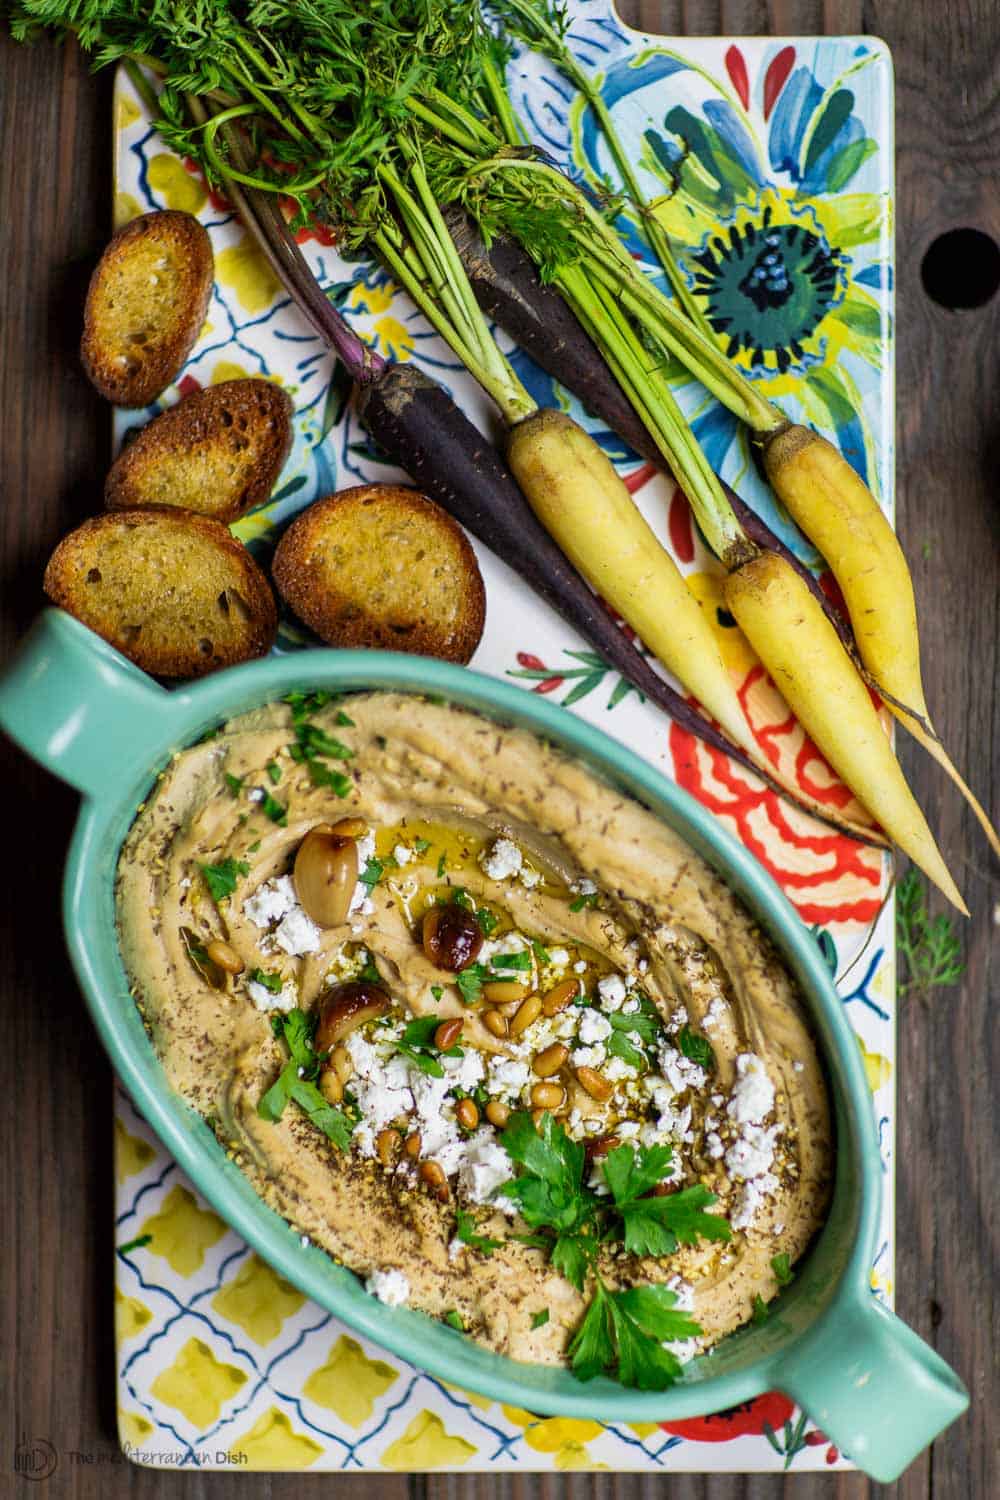 Roasted Garlic Hummus | The Mediterranean Dish. Smooth and creamy hummus dip with the perfect flavor combination. Sweet. Smoky. And just enough zing. Top it with toasted pine nuts, and feta. The best roasted garlic hummus ever from TheMediterraneanDish.com